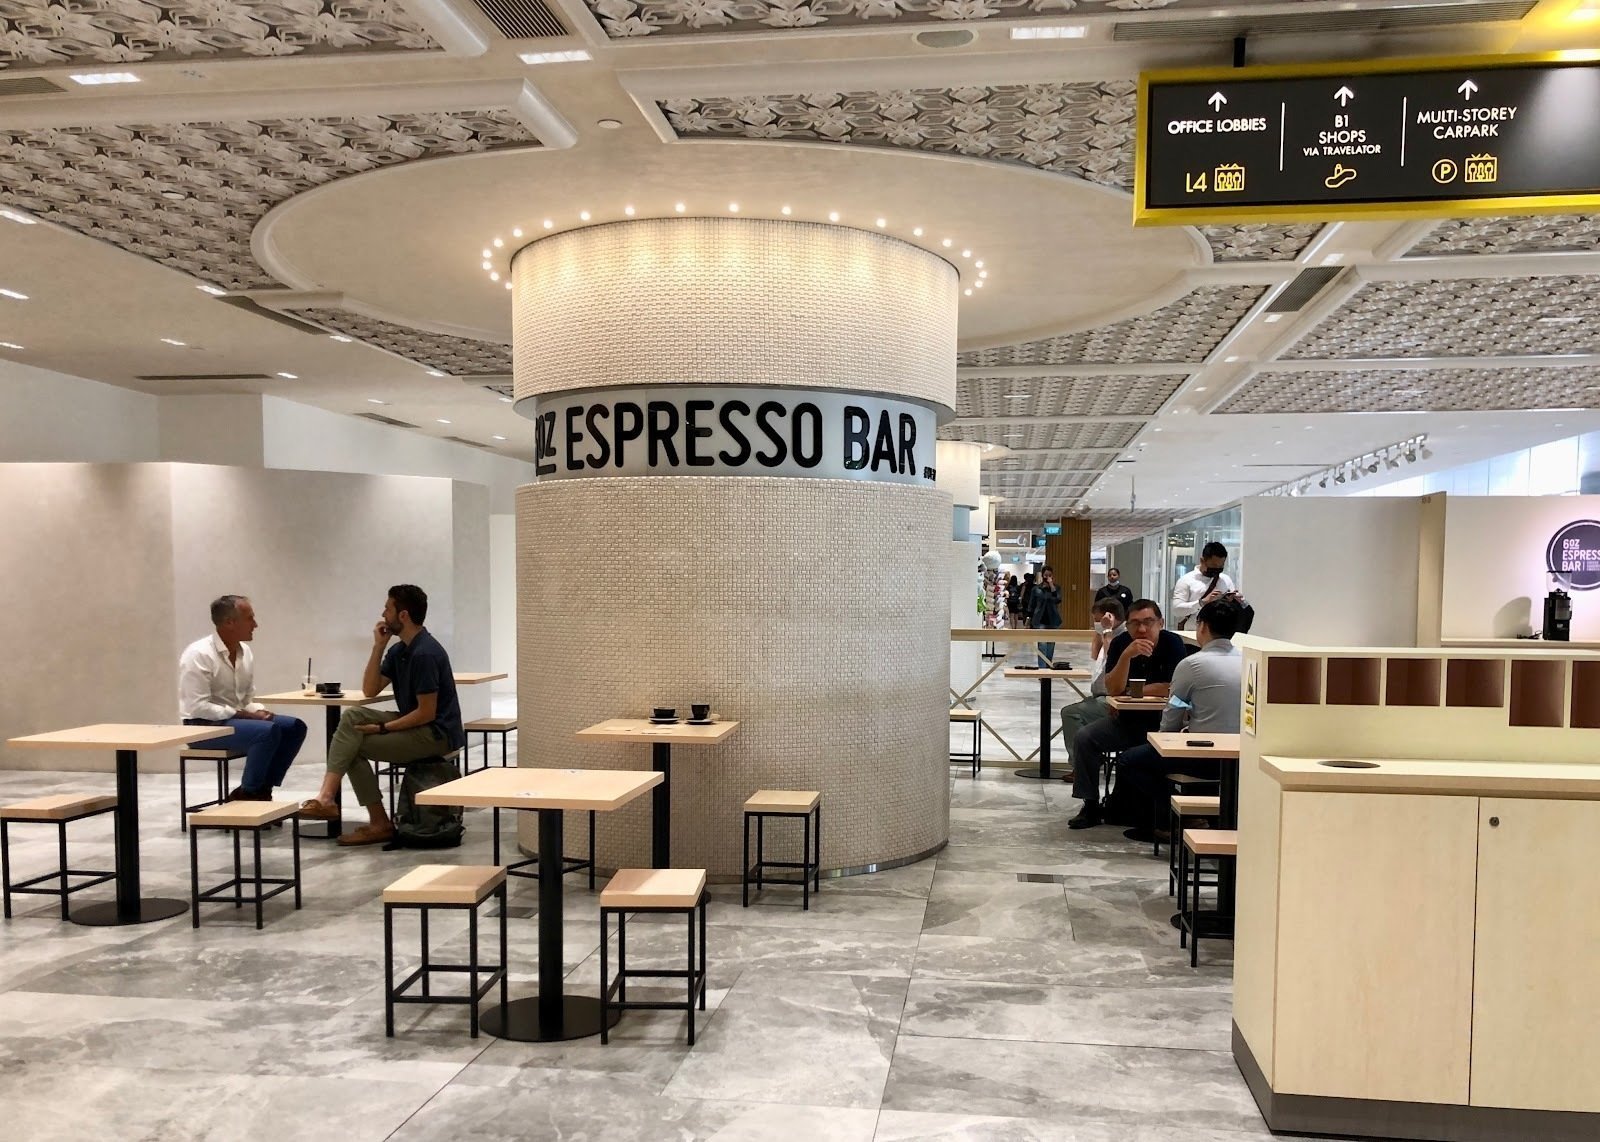 <span class="translation_missing" title="translation missing: en.meta.location_title, location_name: 6oz Espresso Bar @ OUE Downtown Gallery, city: Singapore">Location Title</span>